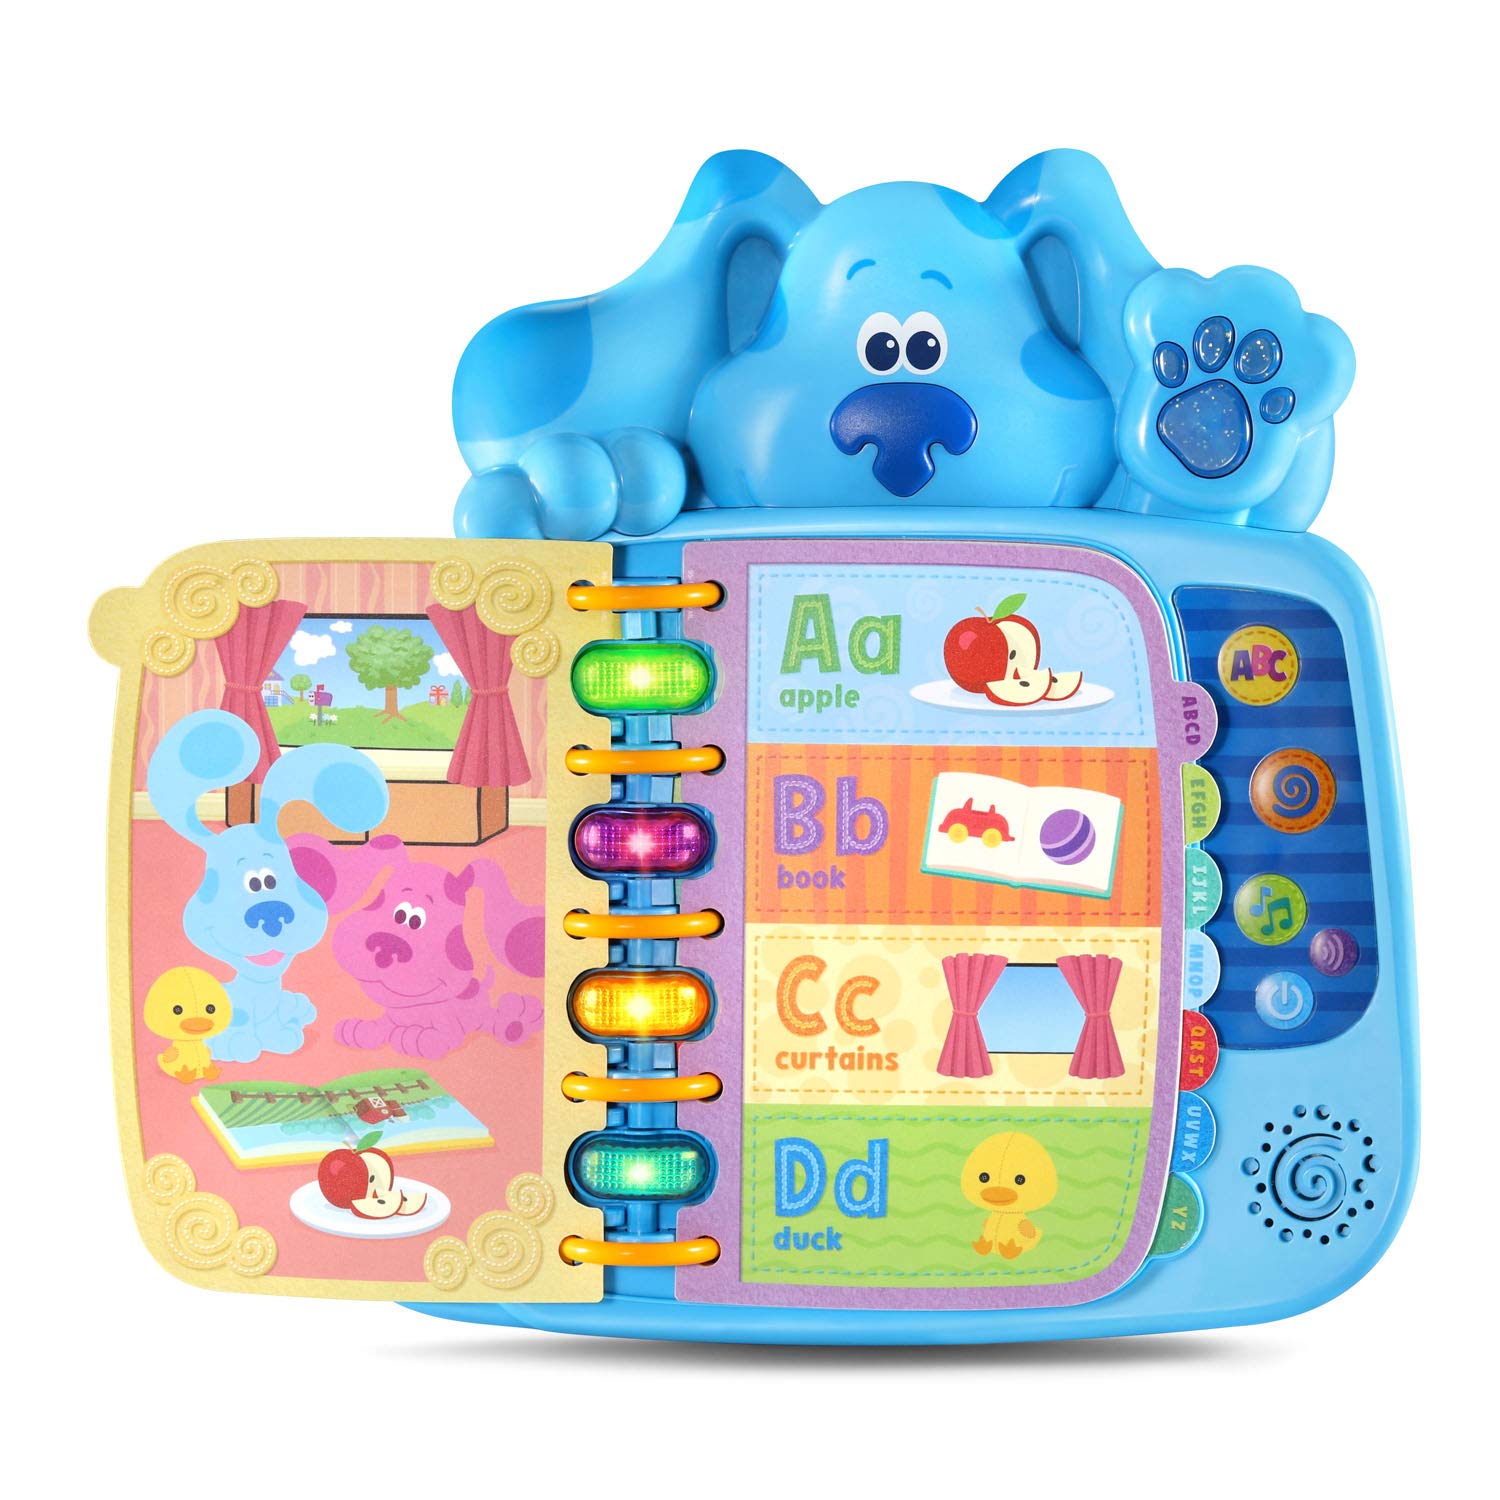 LeapFrog Blue's Clues and You! Skidoo Into ABCs Book, Blue